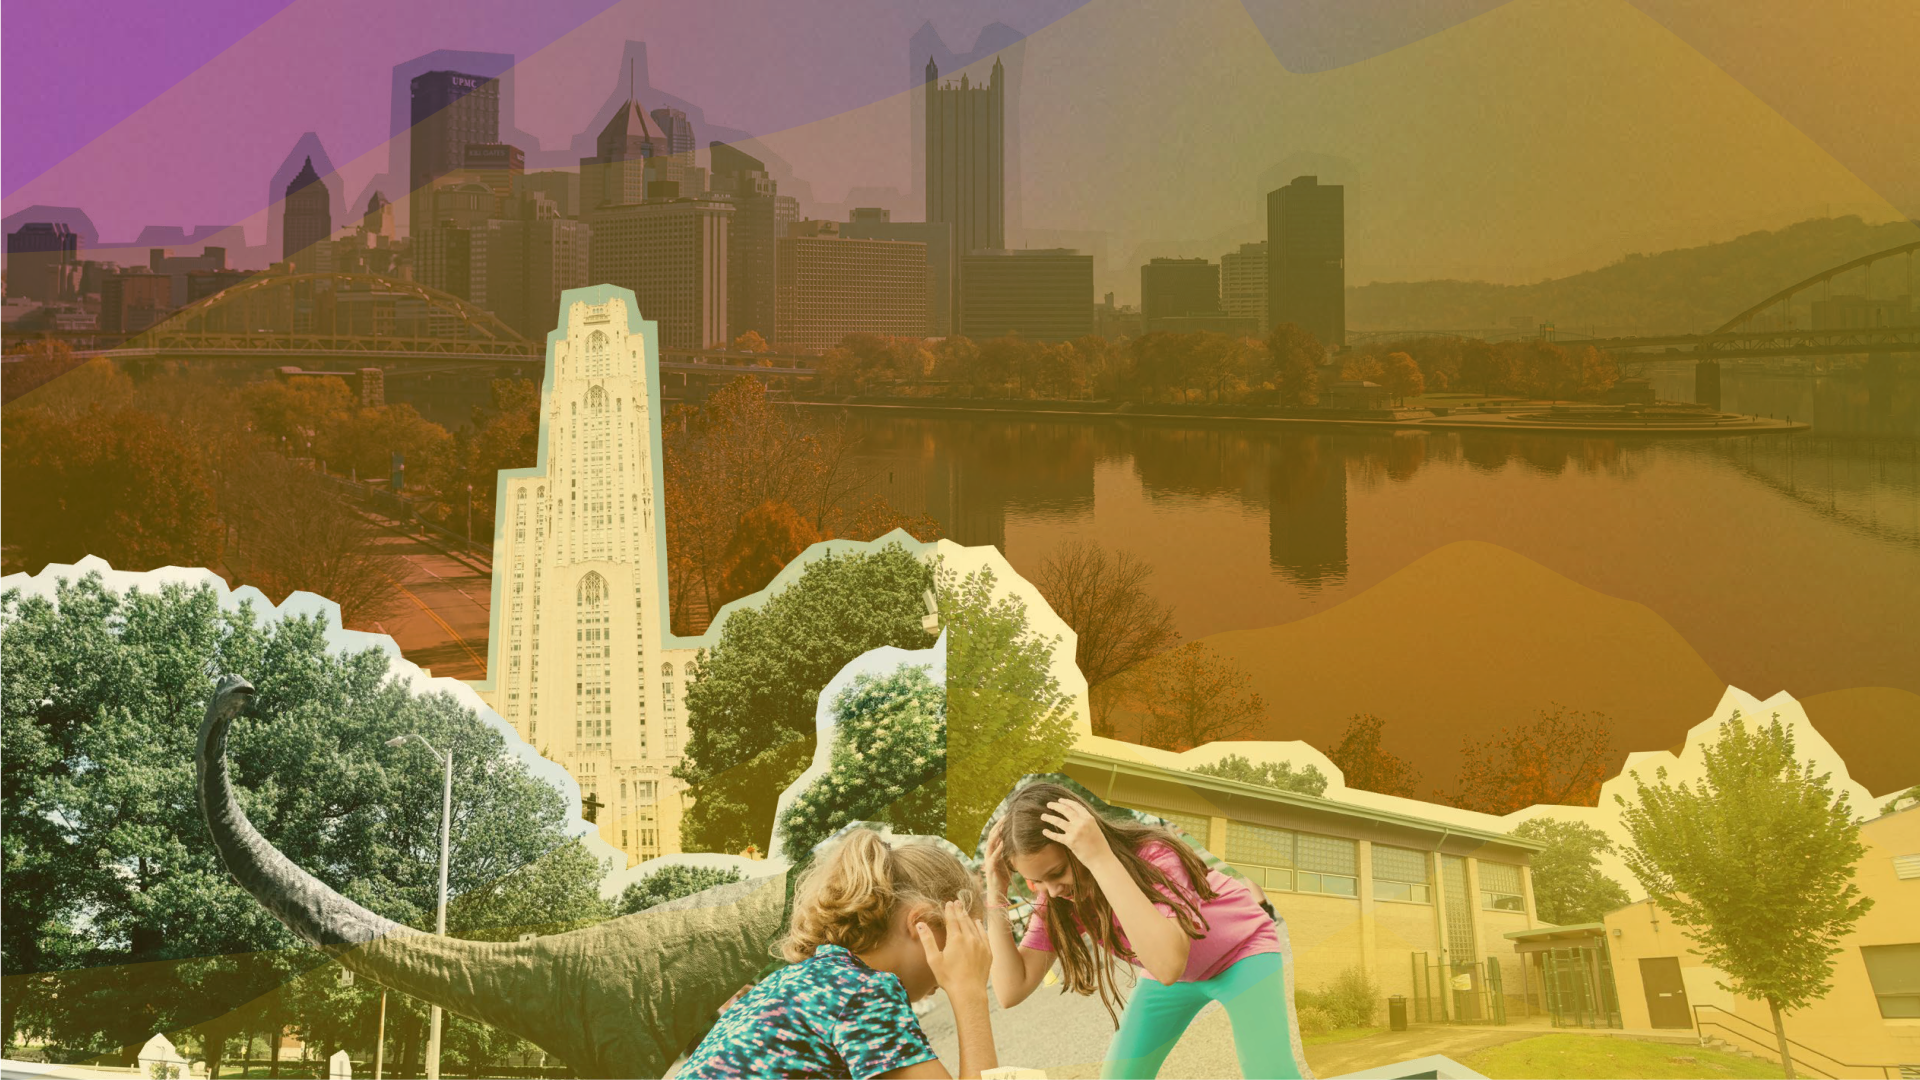 A collage of images the city of Pittsburgh with two children playing in the foreground.